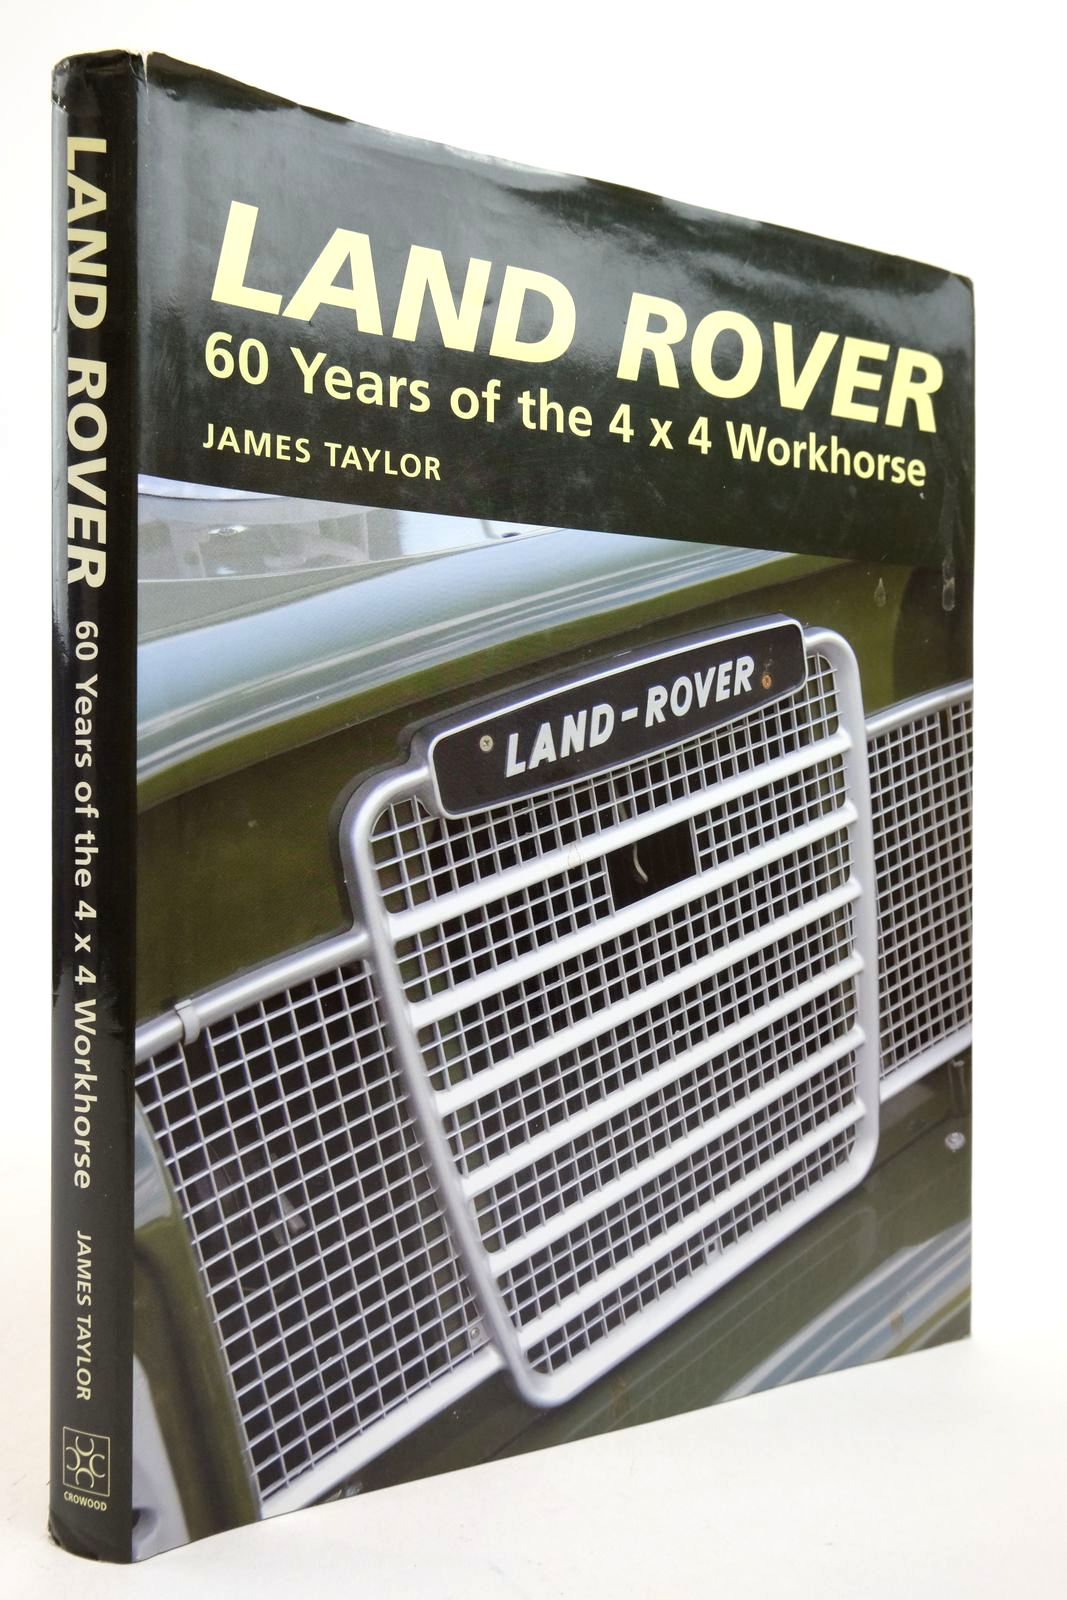 Photo of LAND ROVER: 60 YEARS OF THE 4 X 4 WORKHORSE written by Taylor, James published by The Crowood Press (STOCK CODE: 2140754)  for sale by Stella & Rose's Books